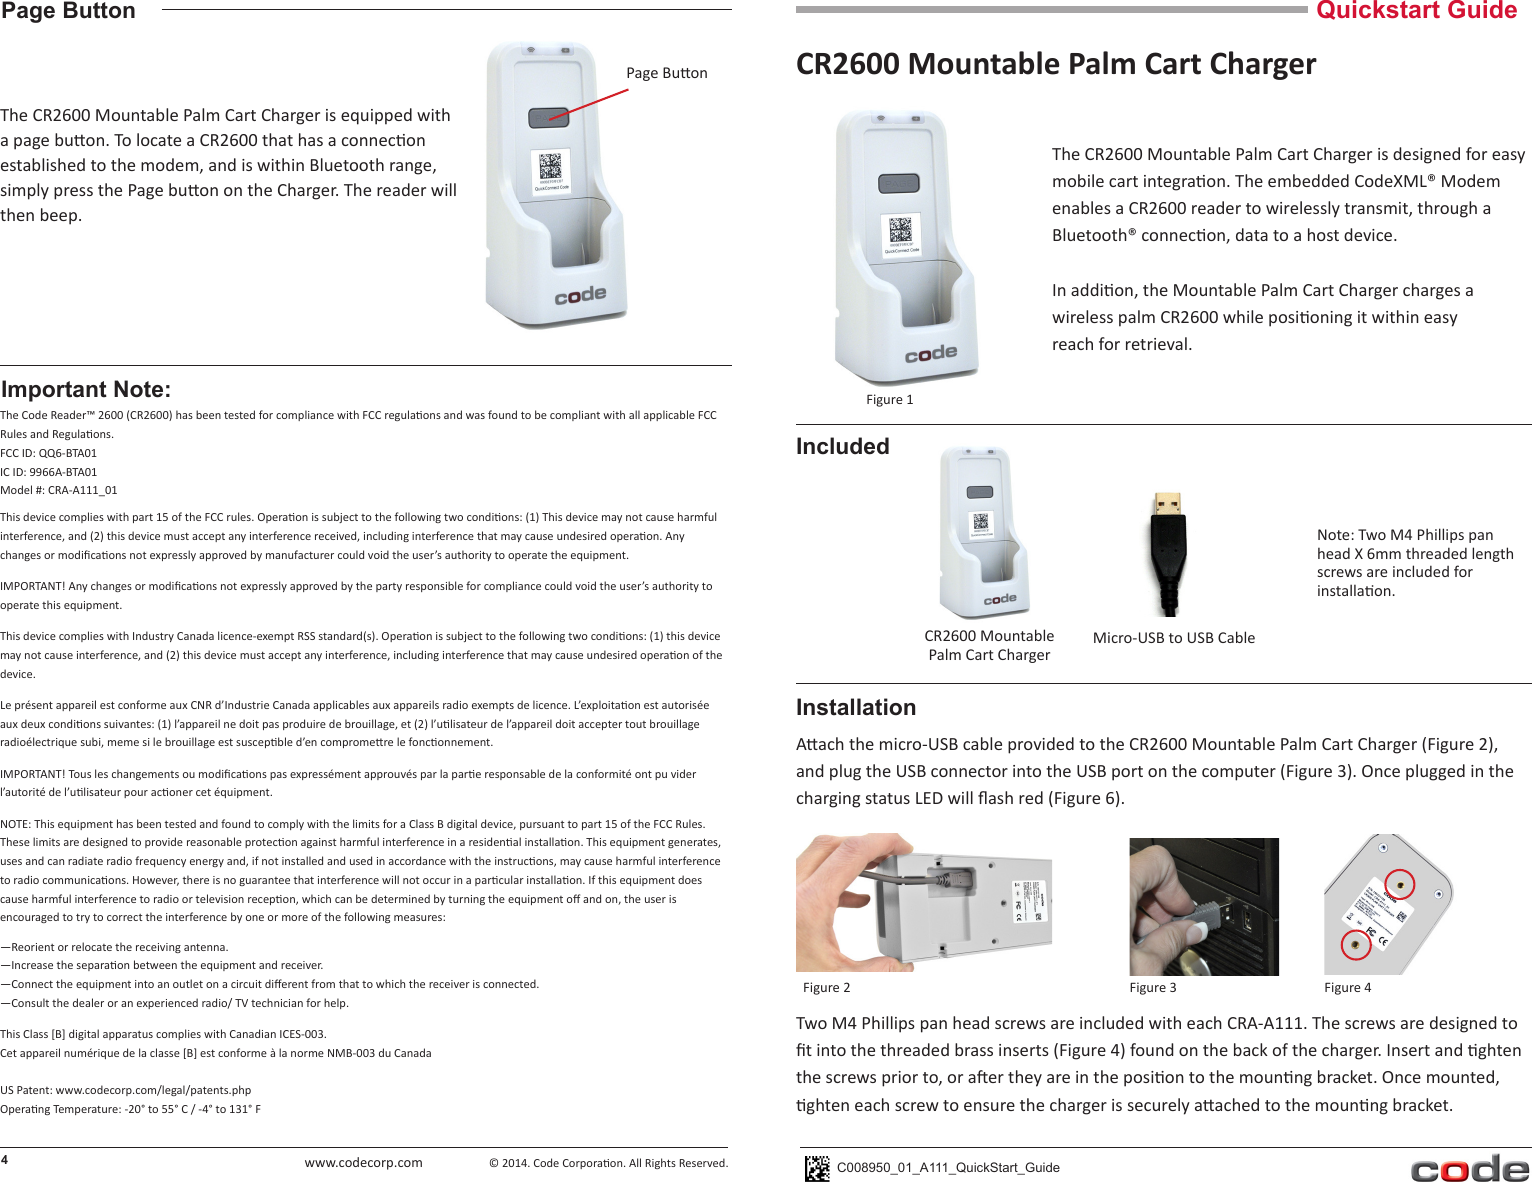 www.codecorp.comQuickstart GuideCR2600 Mountable Palm Cart ChargerC008950_01_A111_QuickStart_GuideThe CR2600 Mountable Palm Cart Charger is designed for easy mobile cart integraon. The embedded CodeXML® Modem enables a CR2600 reader to wirelessly transmit, through a Bluetooth® connecon, data to a host device.  In addion, the Mountable Palm Cart Charger charges a wireless palm CR2600 while posioning it within easyreach for retrieval.Aach the micro-USB cable provided to the CR2600 Mountable Palm Cart Charger (Figure 2), and plug the USB connector into the USB port on the computer (Figure 3). Once plugged in the charging status LED will ash red (Figure 6).4InstallationFigure 1The Code Reader™ 2600 (CR2600) has been tested for compliance with FCC regulaons and was found to be compliant with all applicable FCC Rules and Regulaons. FCC ID: QQ6-BTA01IC ID: 9966A-BTA01Model #: CRA-A111_01This device complies with part 15 of the FCC rules. Operaon is subject to the following two condions: (1) This device may not cause harmful interference, and (2) this device must accept any interference received, including interference that may cause undesired operaon. Any changes or modicaons not expressly approved by manufacturer could void the user’s authority to operate the equipment. IMPORTANT! Any changes or modicaons not expressly approved by the party responsible for compliance could void the user’s authority to operate this equipment. This device complies with Industry Canada licence-exempt RSS standard(s). Operaon is subject to the following two condions: (1) this device may not cause interference, and (2) this device must accept any interference, including interference that may cause undesired operaon of thedevice.Le présent appareil est conforme aux CNR d’Industrie Canada applicables aux appareils radio exempts de licence. L’exploitaon est autorisée aux deux condions suivantes: (1) l’appareil ne doit pas produire de brouillage, et (2) l’ulisateur de l’appareil doit accepter tout brouillage radioélectrique subi, meme si le brouillage est suscepble d’en compromere le fonconnement. IMPORTANT! Tous les changements ou modicaons pas expressément approuvés par la pare responsable de la conformité ont pu vider l’autorité de l’ulisateur pour aconer cet équipment.NOTE: This equipment has been tested and found to comply with the limits for a Class B digital device, pursuant to part 15 of the FCC Rules. These limits are designed to provide reasonable protecon against harmful interference in a residenal installaon. This equipment generates, uses and can radiate radio frequency energy and, if not installed and used in accordance with the instrucons, may cause harmful interference to radio communicaons. However, there is no guarantee that interference will not occur in a parcular installaon. If this equipment does cause harmful interference to radio or television recepon, which can be determined by turning the equipment o and on, the user is encouraged to try to correct the interference by one or more of the following measures:—Reorient or relocate the receiving antenna.—Increase the separaon between the equipment and receiver.—Connect the equipment into an outlet on a circuit dierent from that to which the receiver is connected.—Consult the dealer or an experienced radio/ TV technician for help.This Class [B] digital apparatus complies with Canadian ICES-003. Cet appareil numérique de la classe [B] est conforme à la norme NMB-003 du CanadaUS Patent: www.codecorp.com/legal/patents.phpOperang Temperature: -20° to 55° C / -4° to 131° FImportant Note:IncludedMicro-USB to USB CableFigure 2 Figure 3CR2600 MountablePalm Cart ChargerPage ButtonThe CR2600 Mountable Palm Cart Charger is equipped with a page buon. To locate a CR2600 that has a connecon established to the modem, and is within Bluetooth range, simply press the Page buon on the Charger. The reader will then beep. © 2014. Code Corporaon. All Rights Reserved.Page BuonNote: Two M4 Phillips pan head X 6mm threaded length screws are included for installaon.Two M4 Phillips pan head screws are included with each CRA-A111. The screws are designed to t into the threaded brass inserts (Figure 4) found on the back of the charger. Insert and ghten the screws prior to, or aer they are in the posion to the mounng bracket. Once mounted, ghten each screw to ensure the charger is securely aached to the mounng bracket.Figure 4